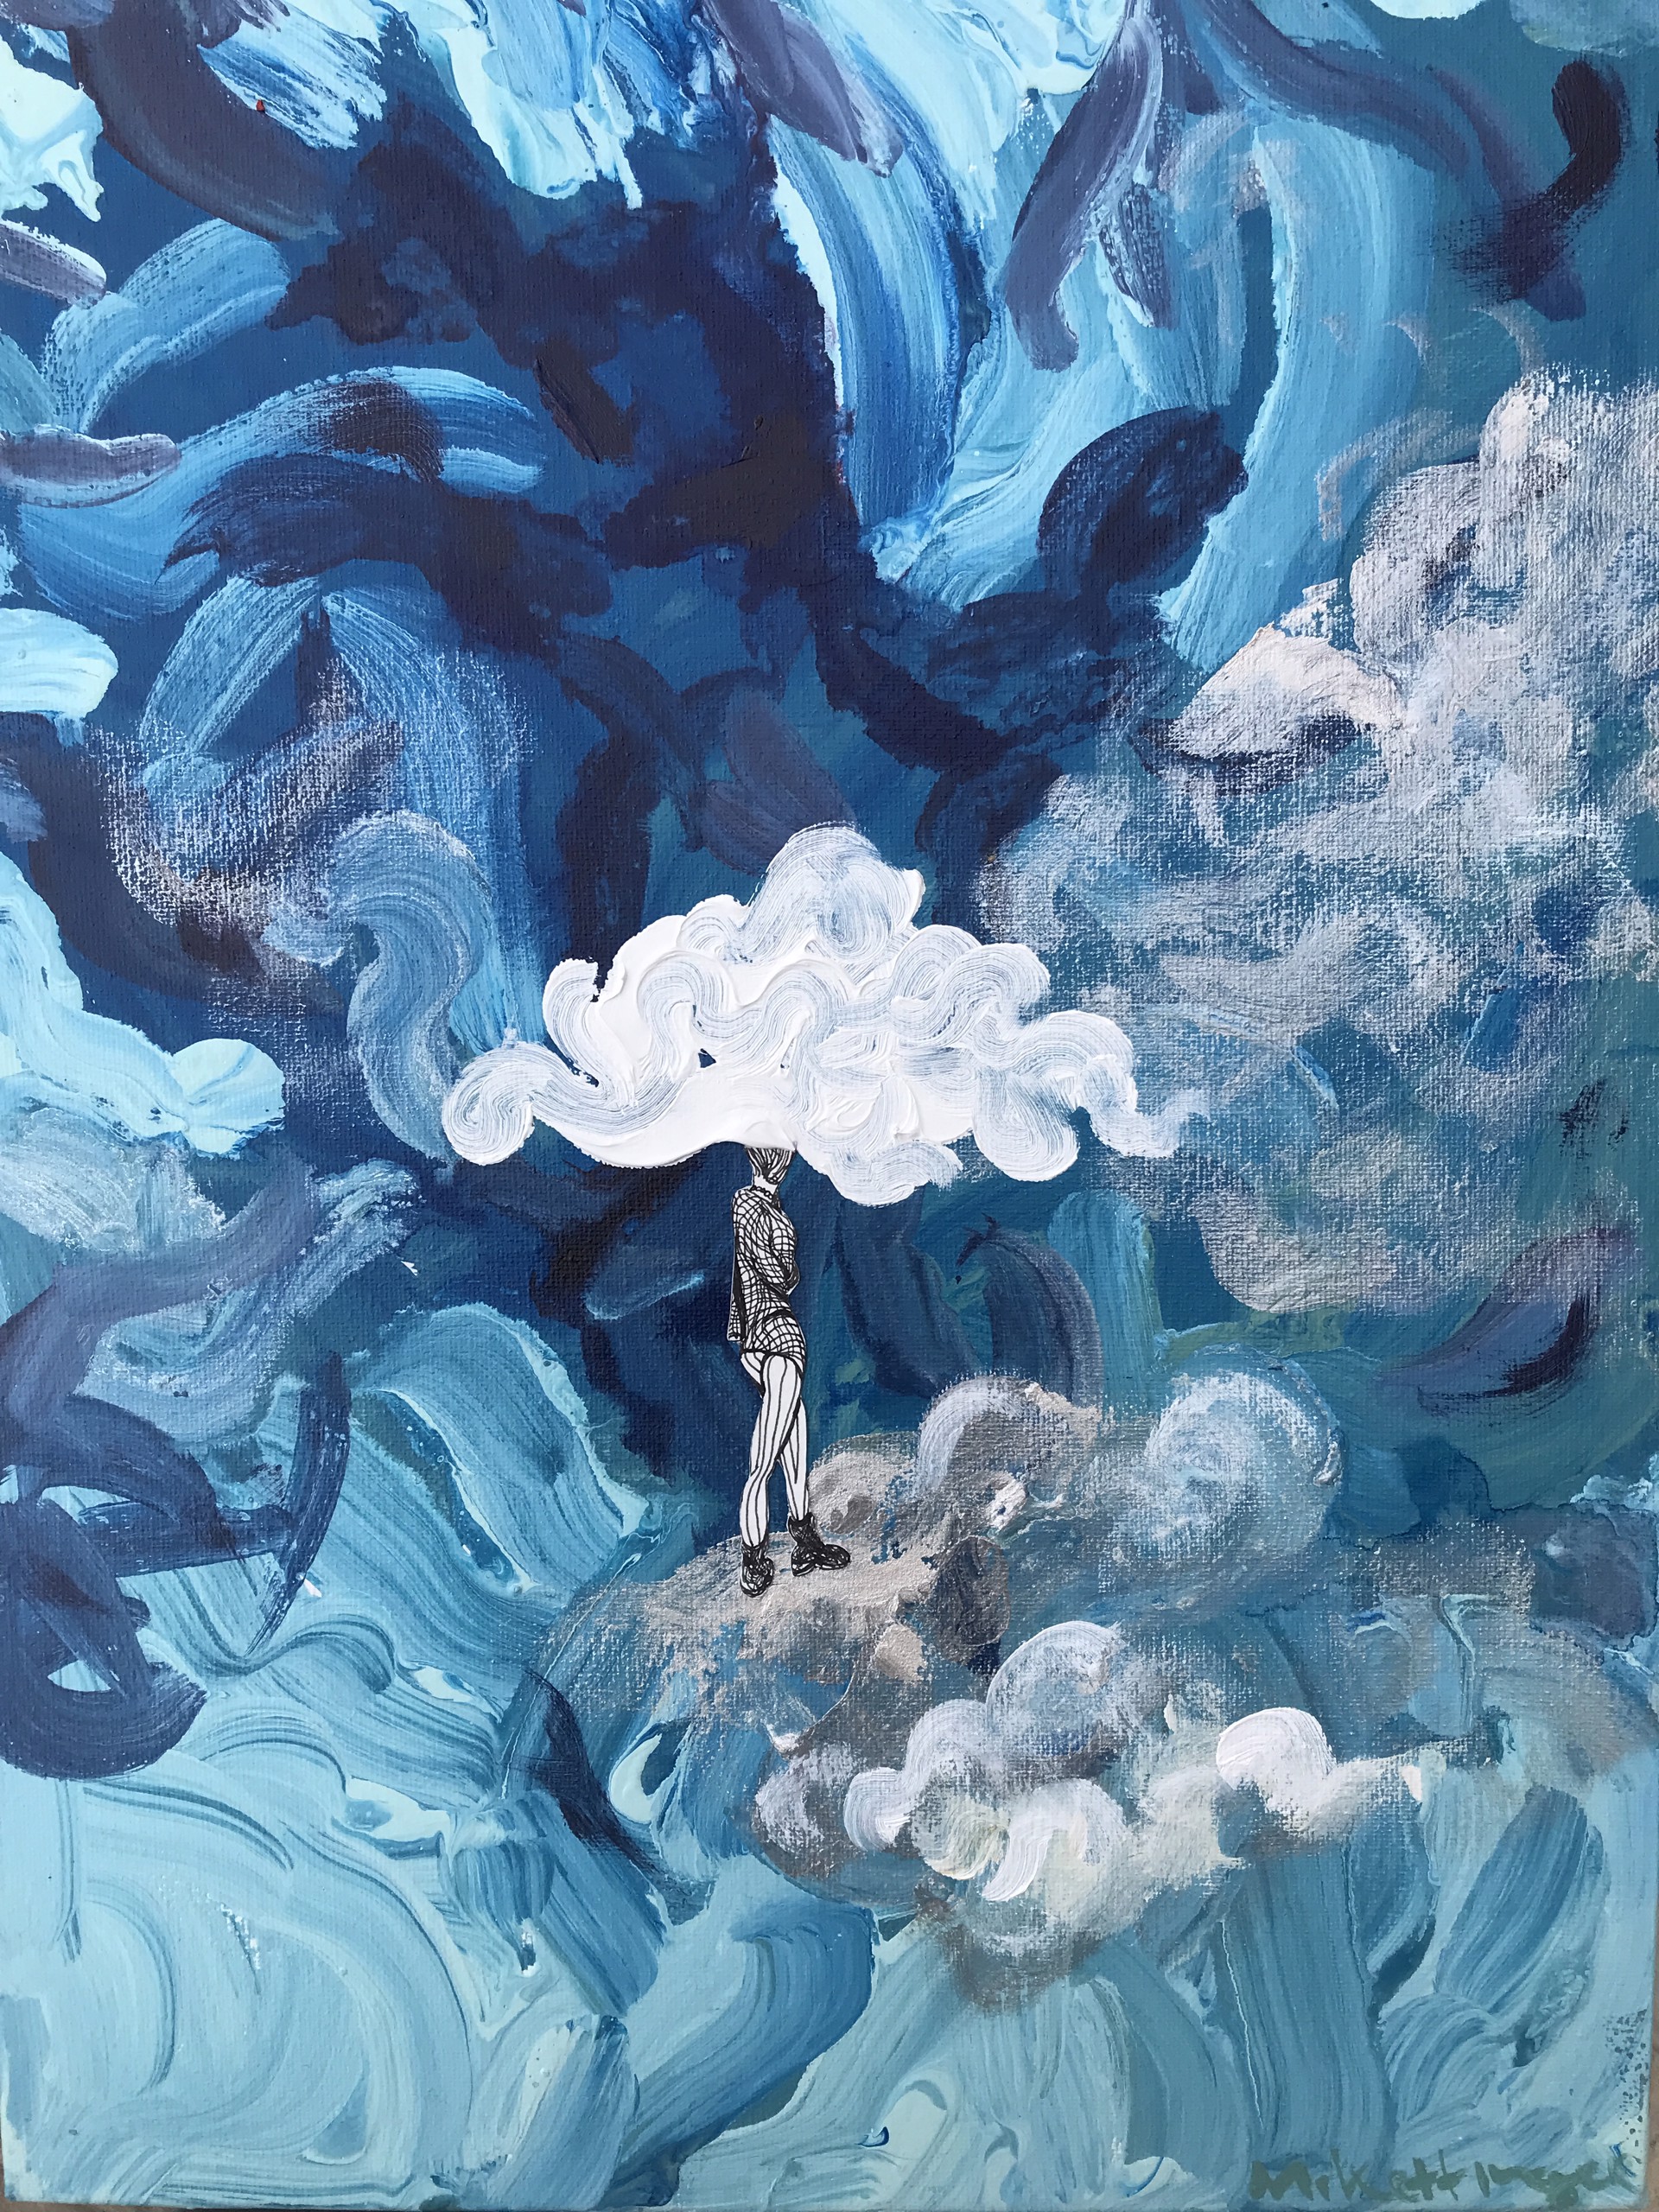 Walking On Clouds #7 by Mikey Kettinger